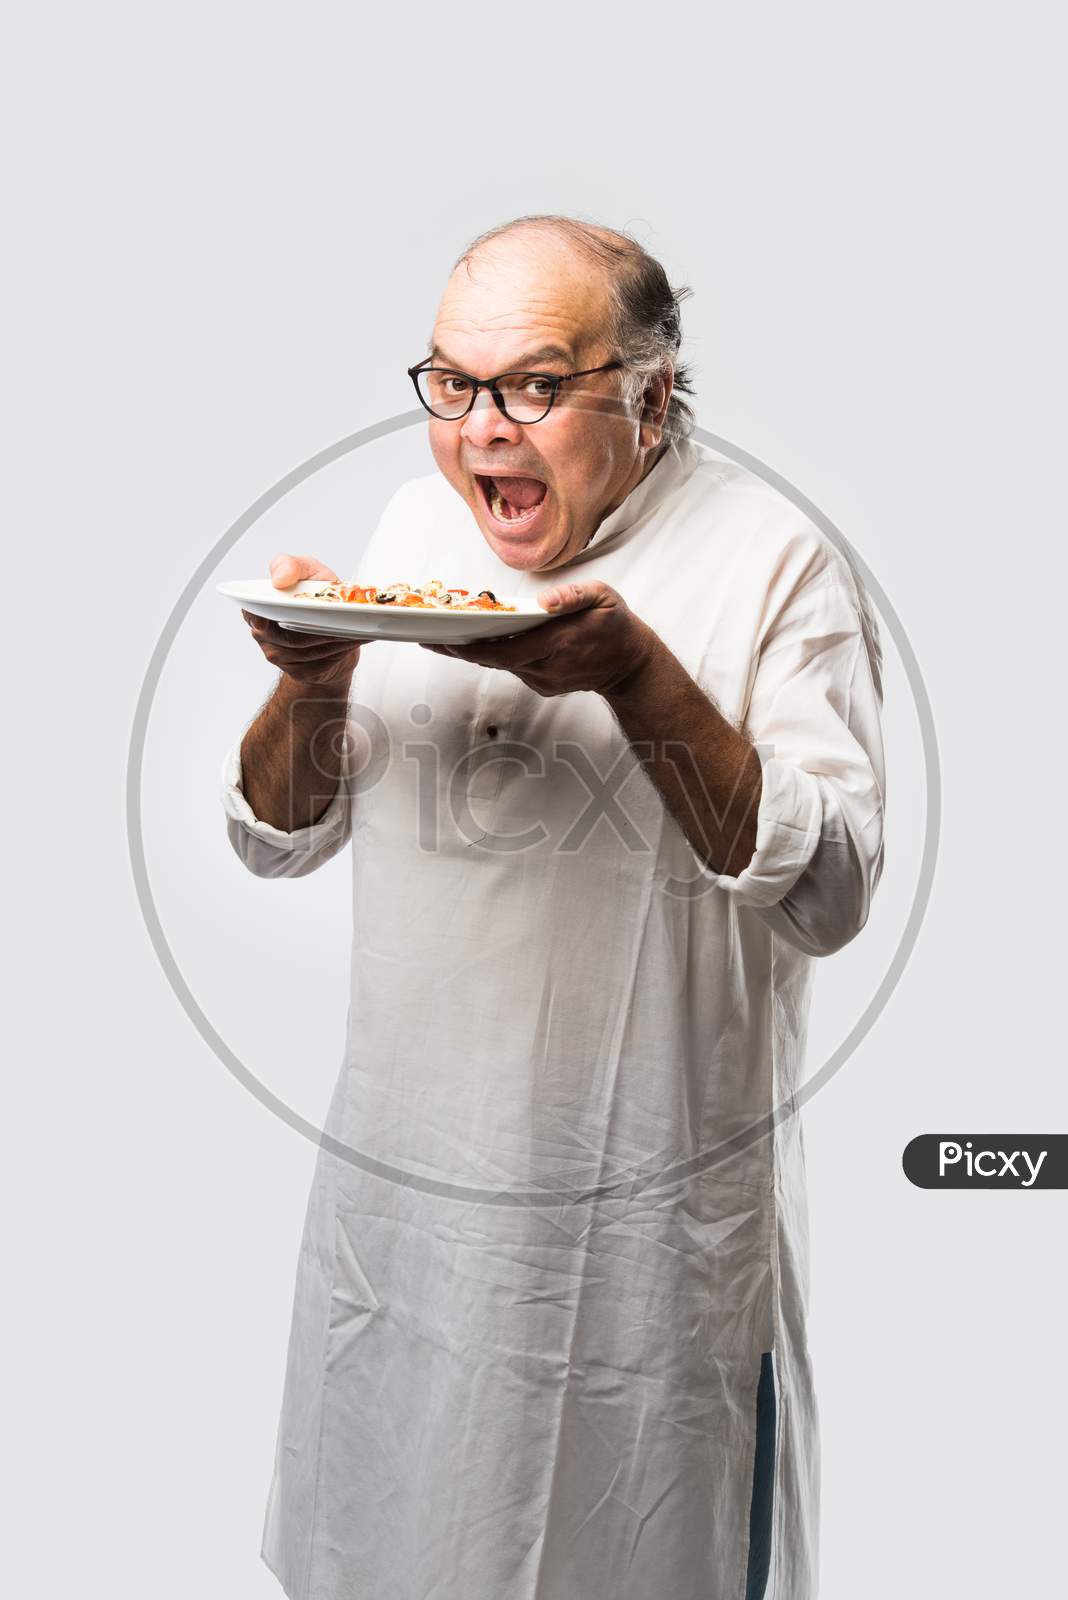 Asian Indian Old Man Eating Pizza With Funny Expressions